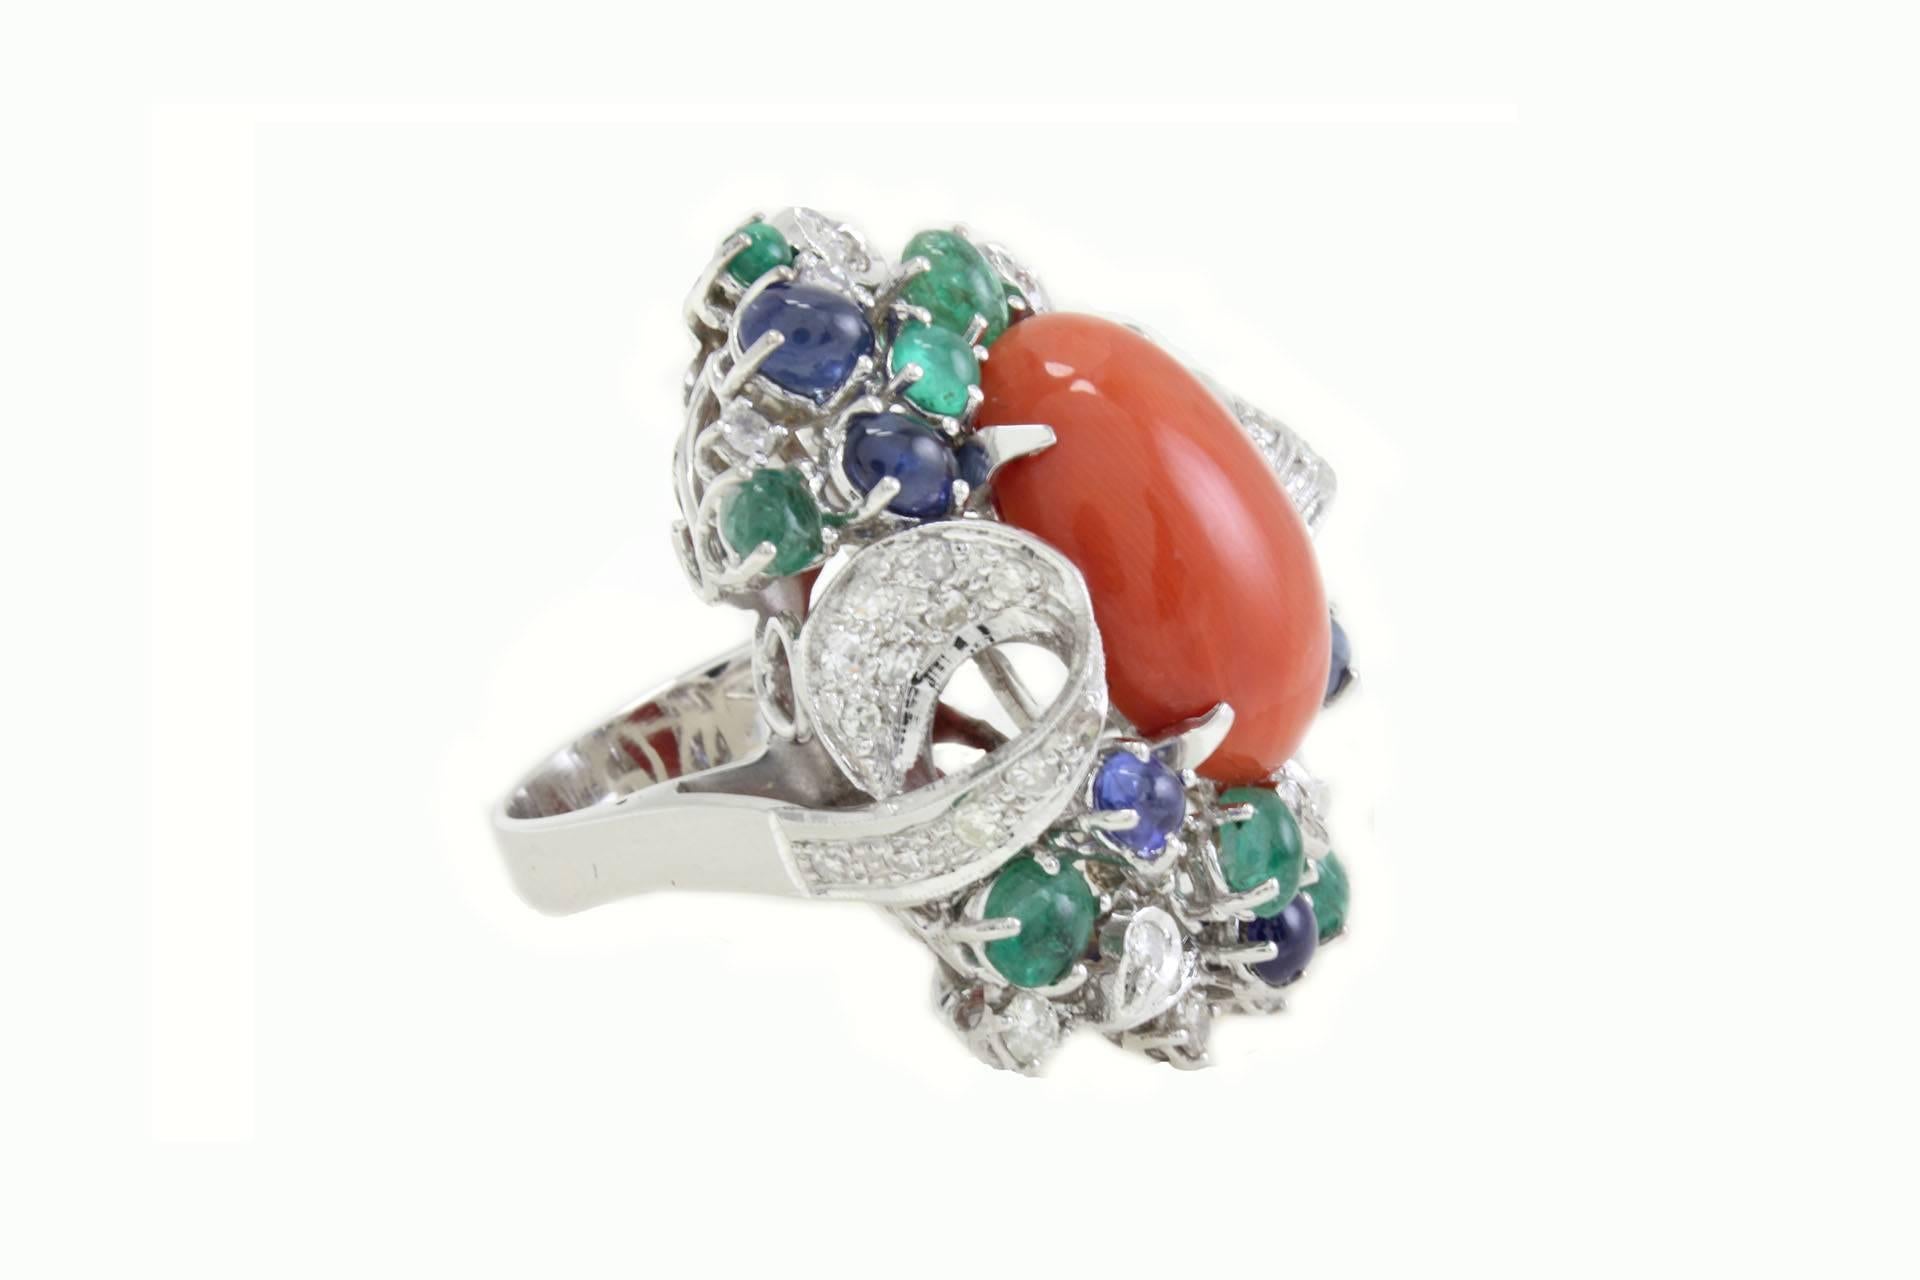 Classic cluster ring in 14Kt white gold embellished with a shapely balance among diamonds, blue sapphires and emeralds, all together are a frame for the central coral.

diamonds(1.60Kt), 
blue sapphires and emeralds(6.10Kt),
coral (2.30gr)
tot